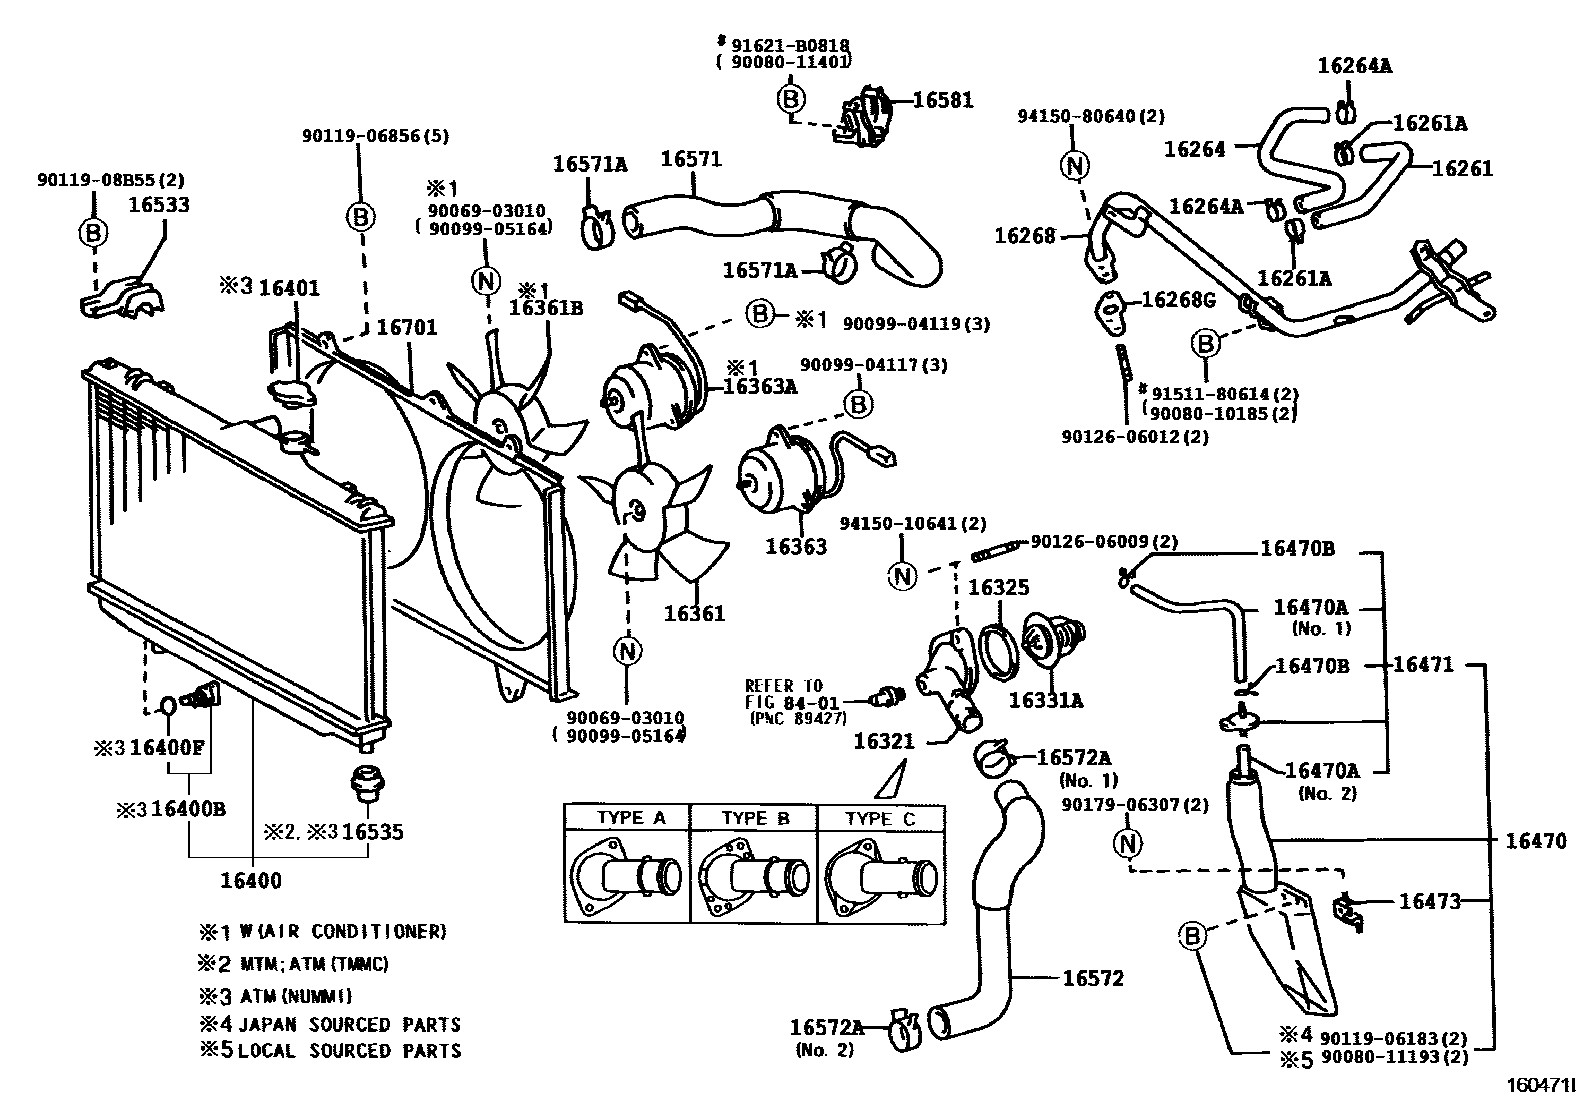 Toyota Tacoma Culb Car F85 Motor Diagrams 1998 toyota Corolla Ve 1zzfe Zze110 Radiator and Water Outle Of Toyota Tacoma Culb Car F85 Motor Diagrams